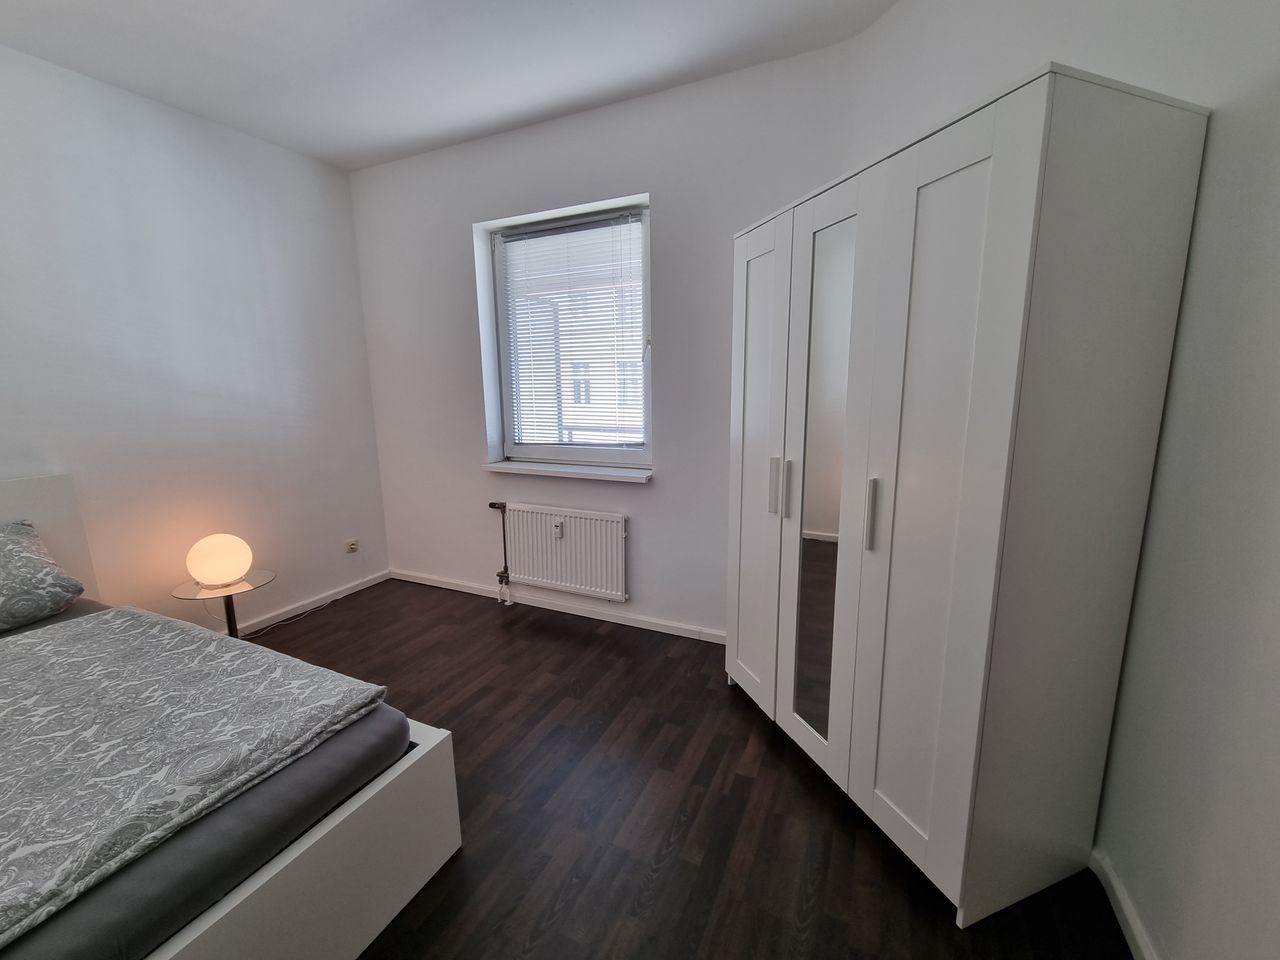 Beautiful apartment (Moabit) centrally located, bright and quiet